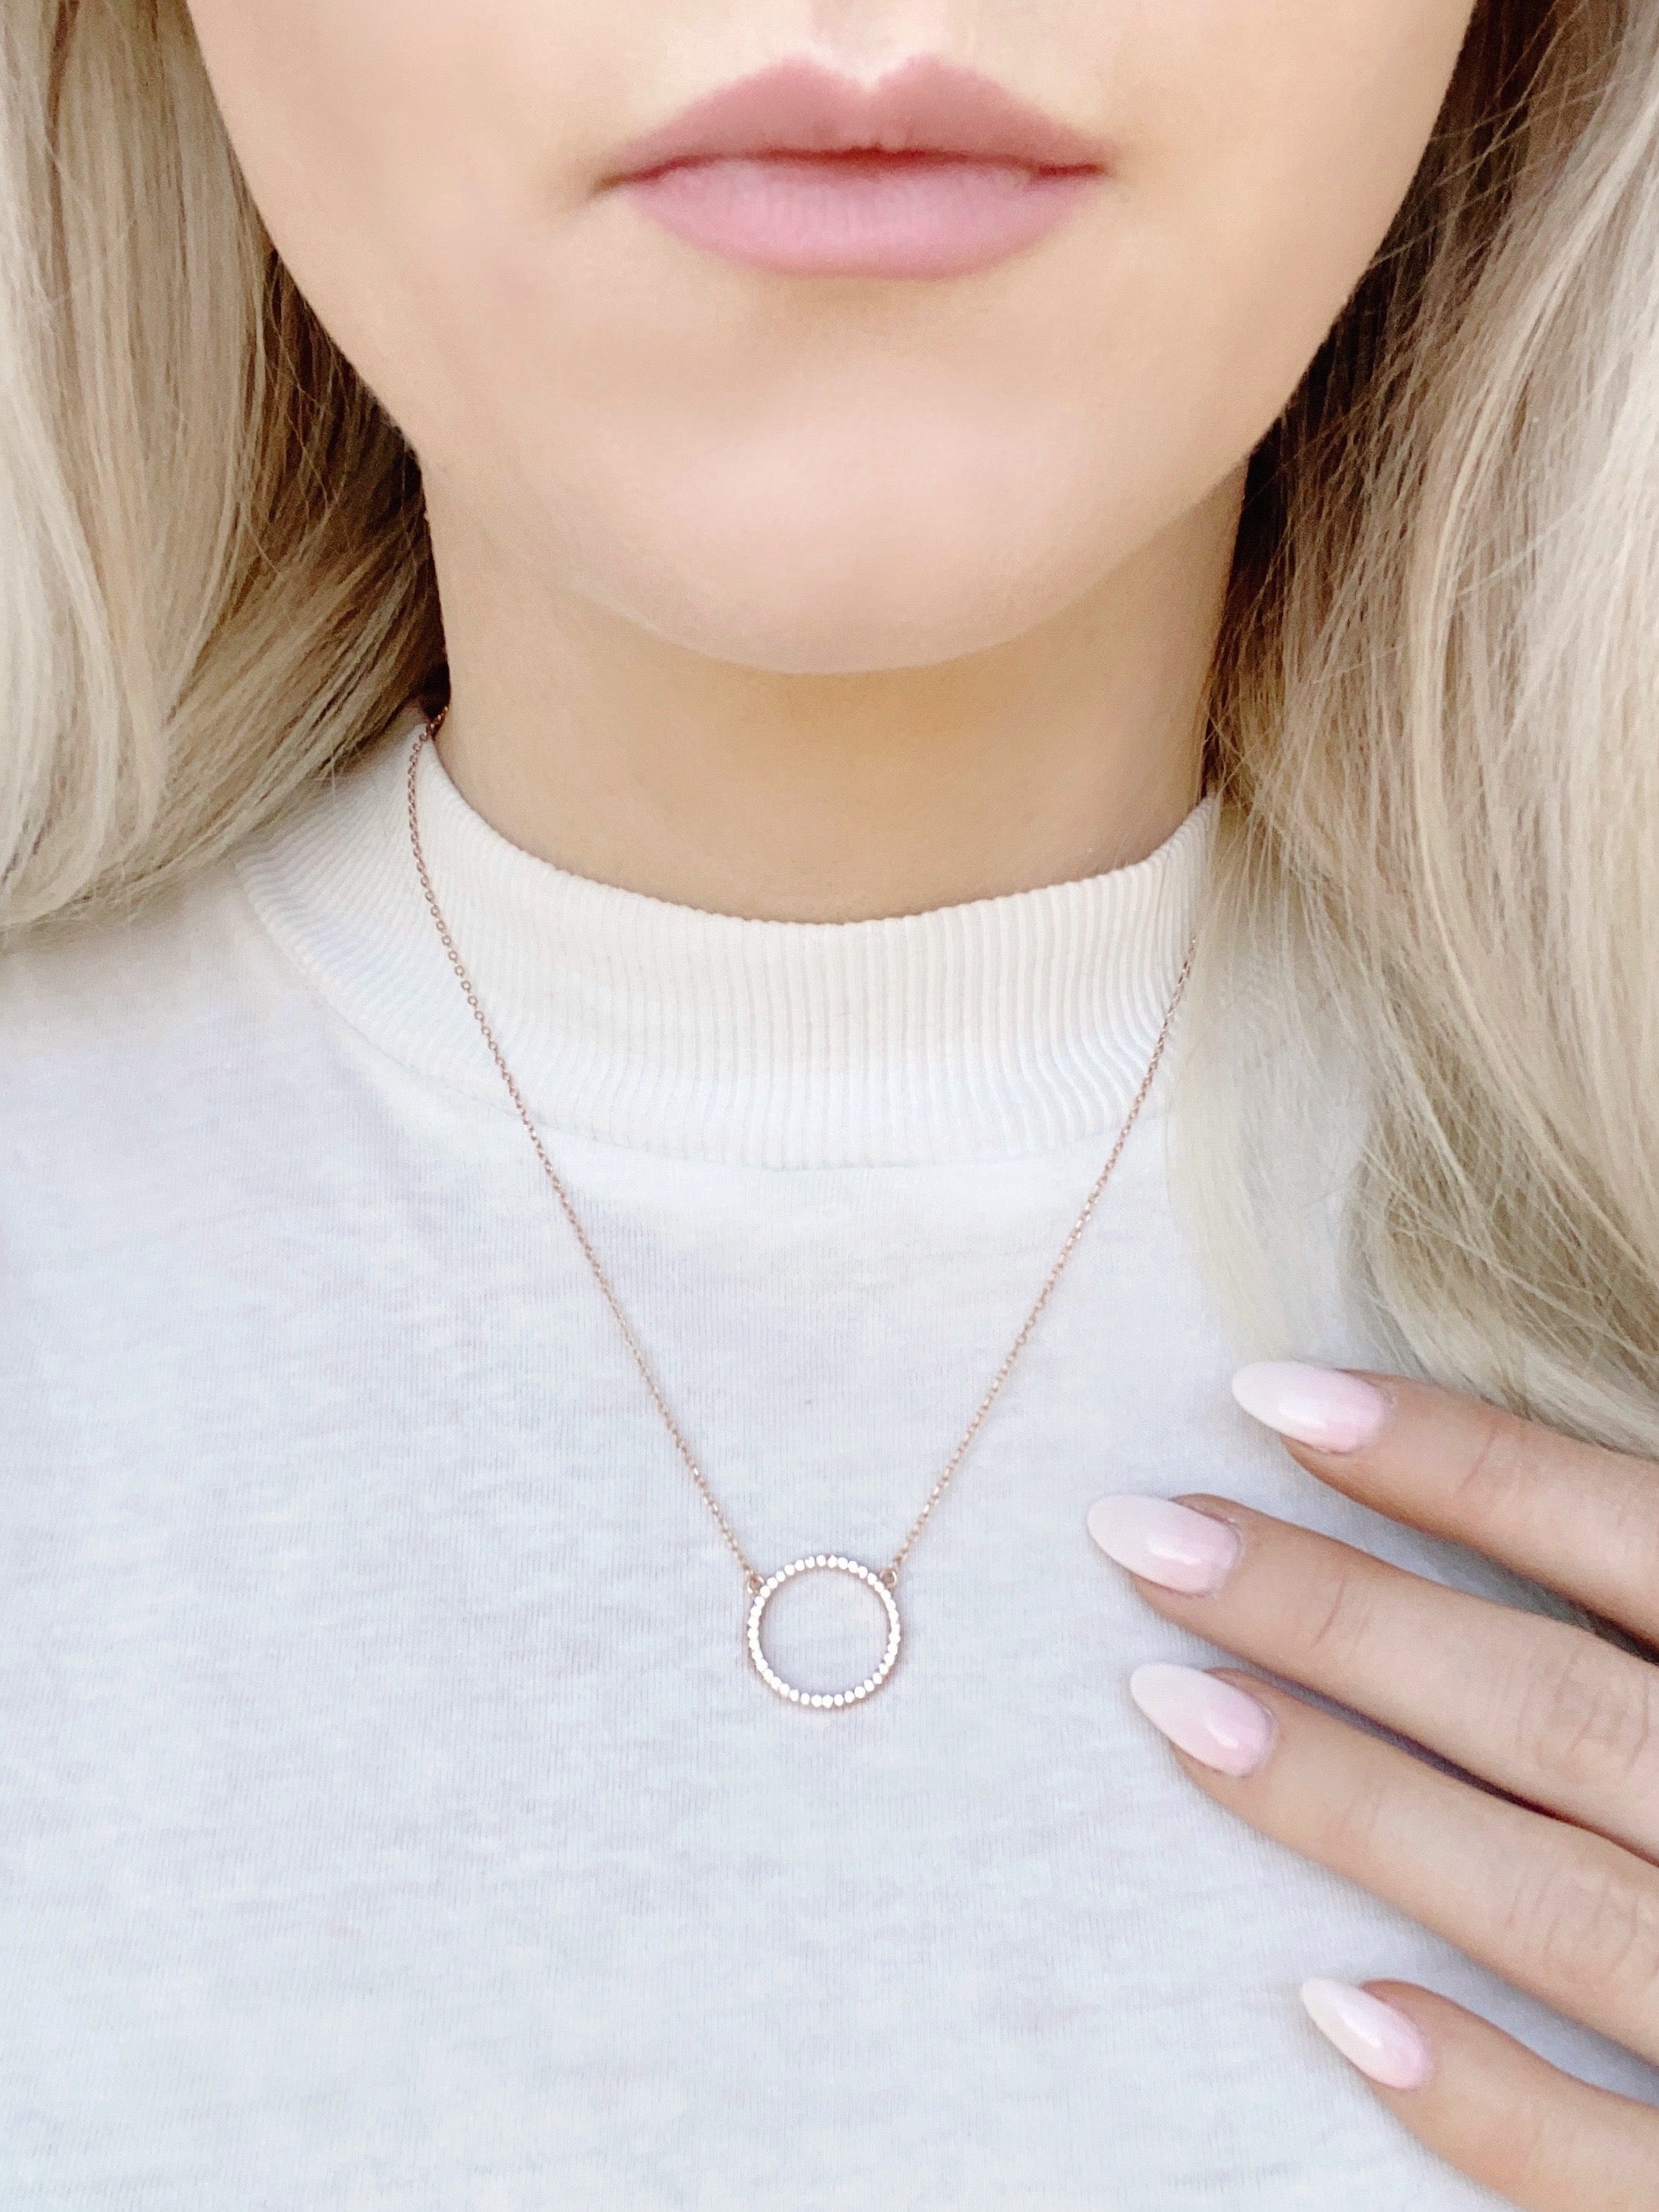 Rose Gold Four Circle Necklace, 4 Sisters Necklace, Family of Four Jewelry,  4 Best Friends Gift, 14k Gold Fill, Sterling Infinity Jewelry - Etsy